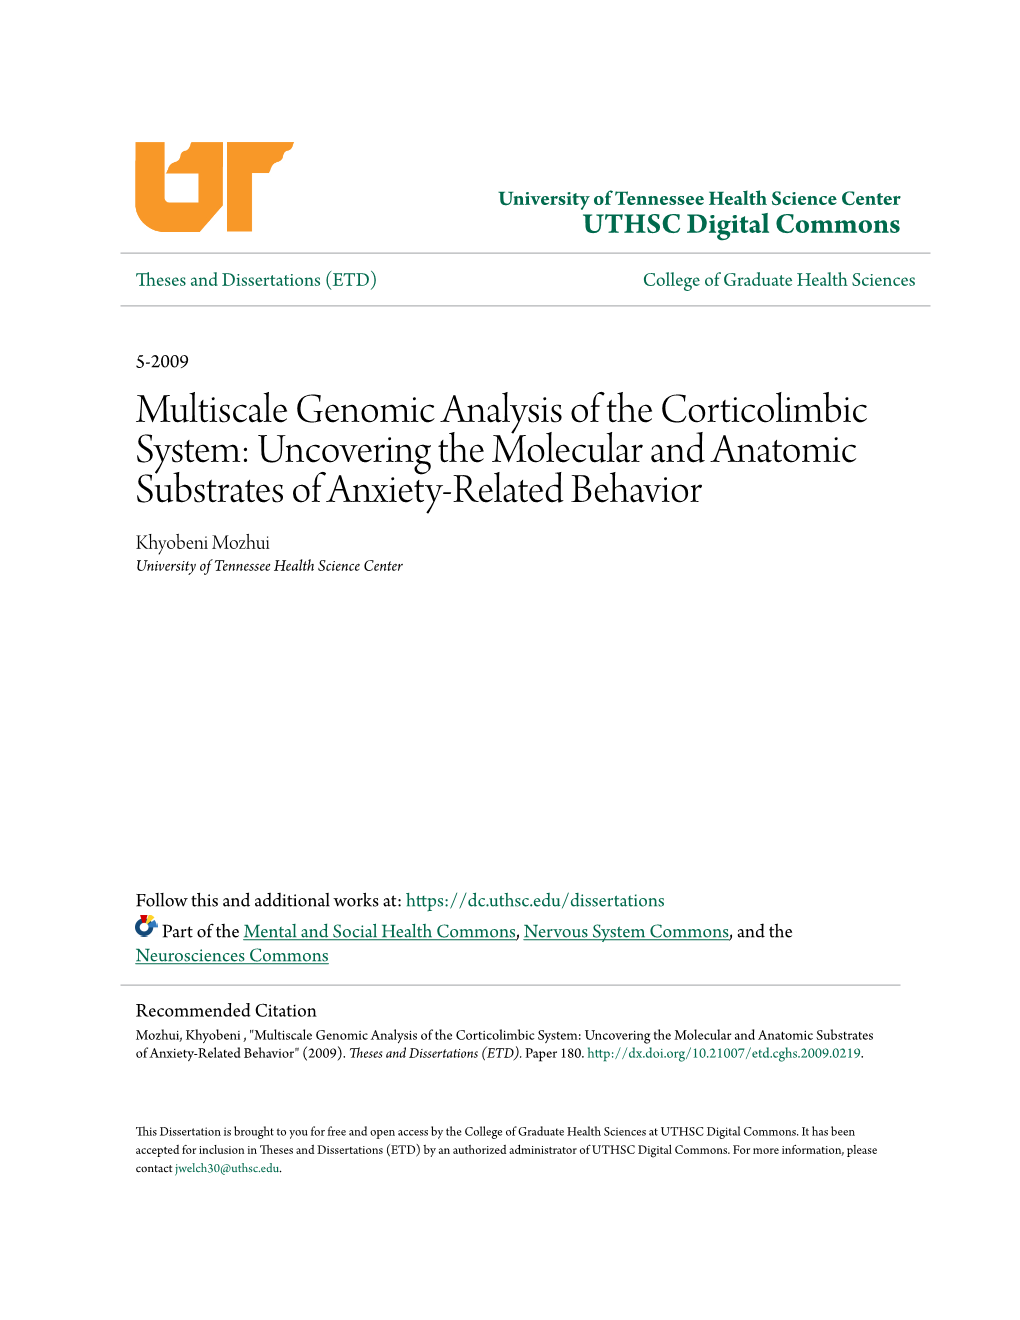 Multiscale Genomic Analysis of The